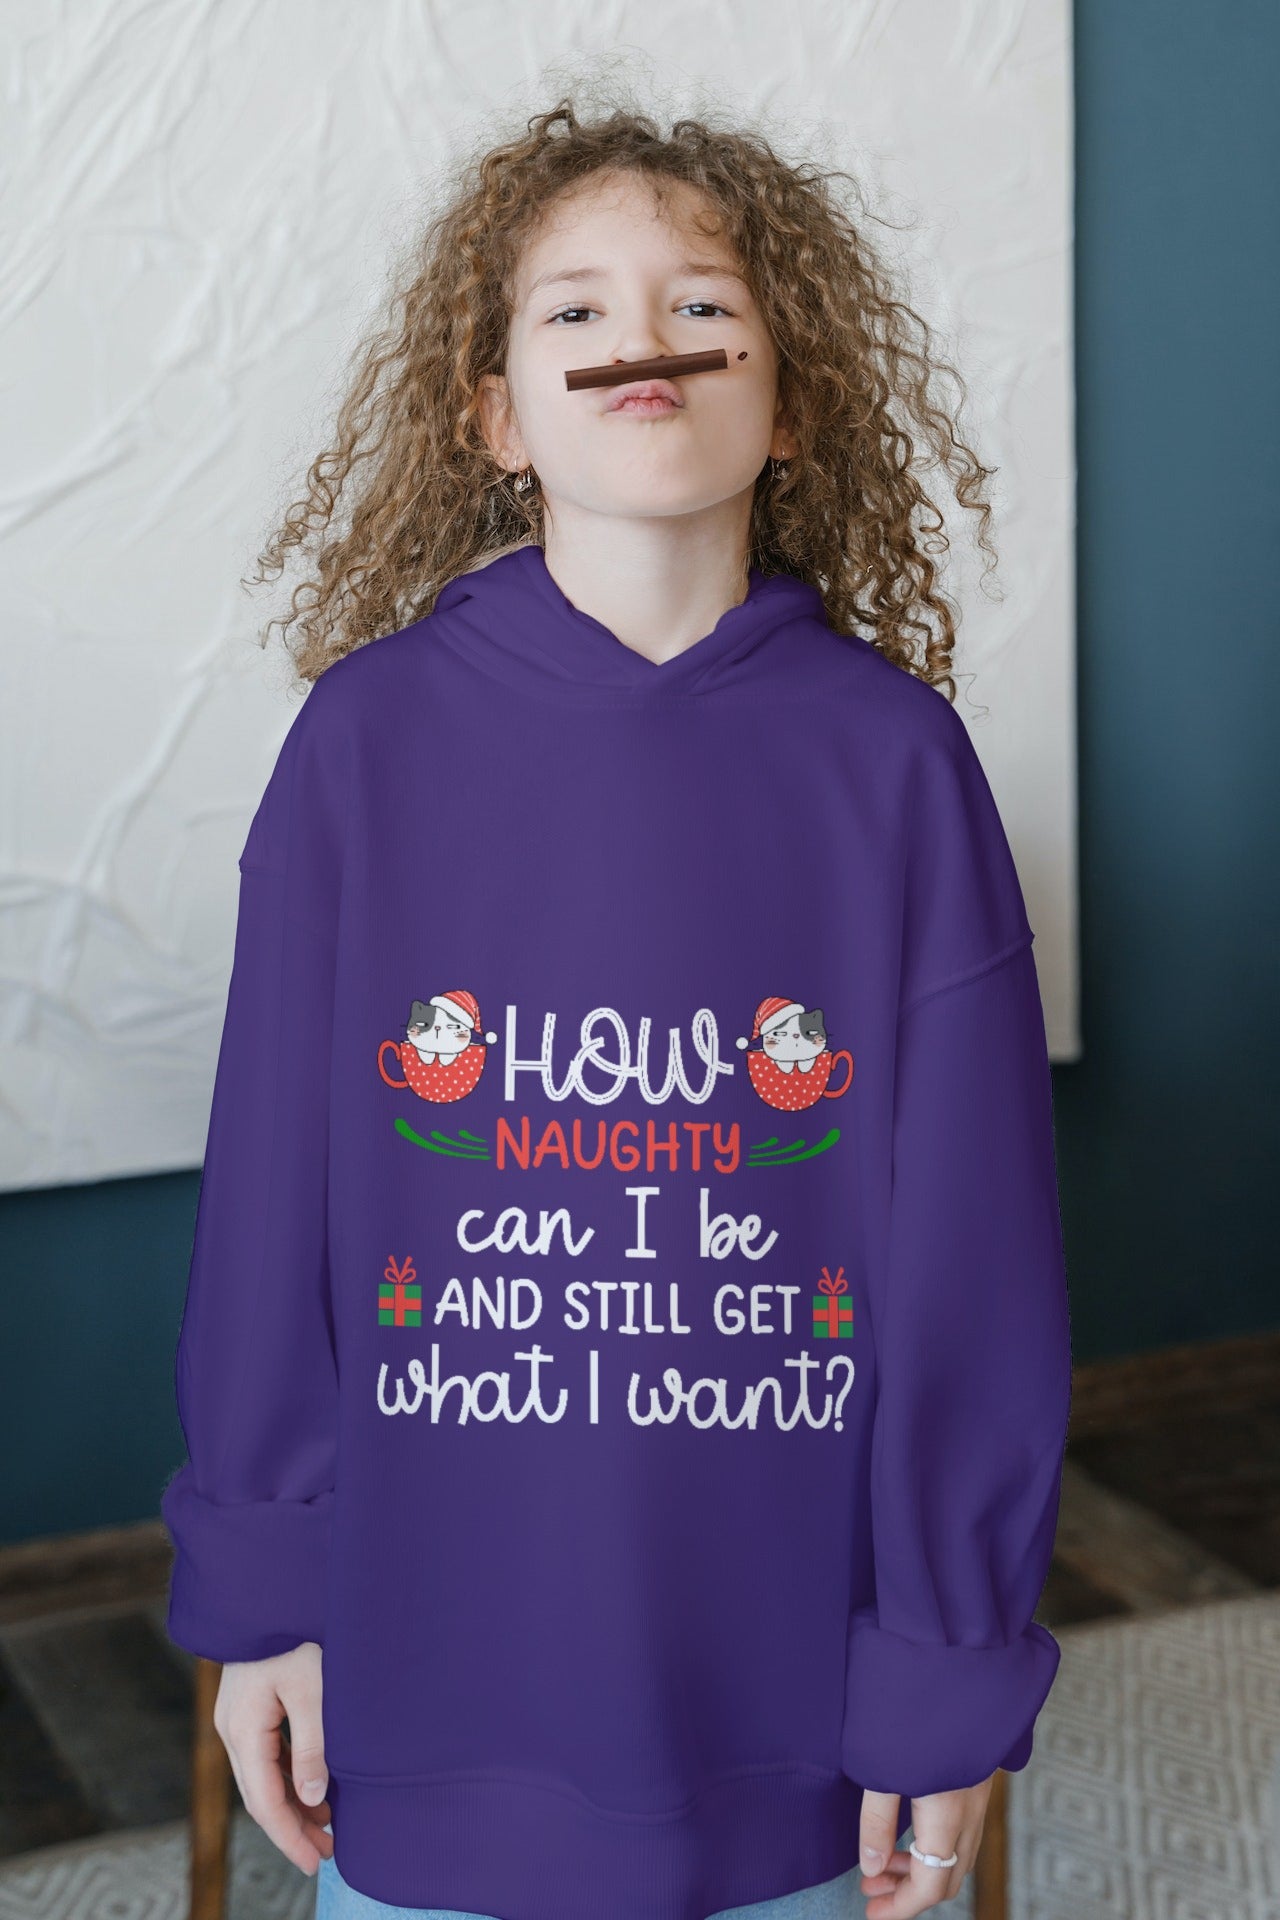 girl wearing a purple sweatshire with Christmas themed design 